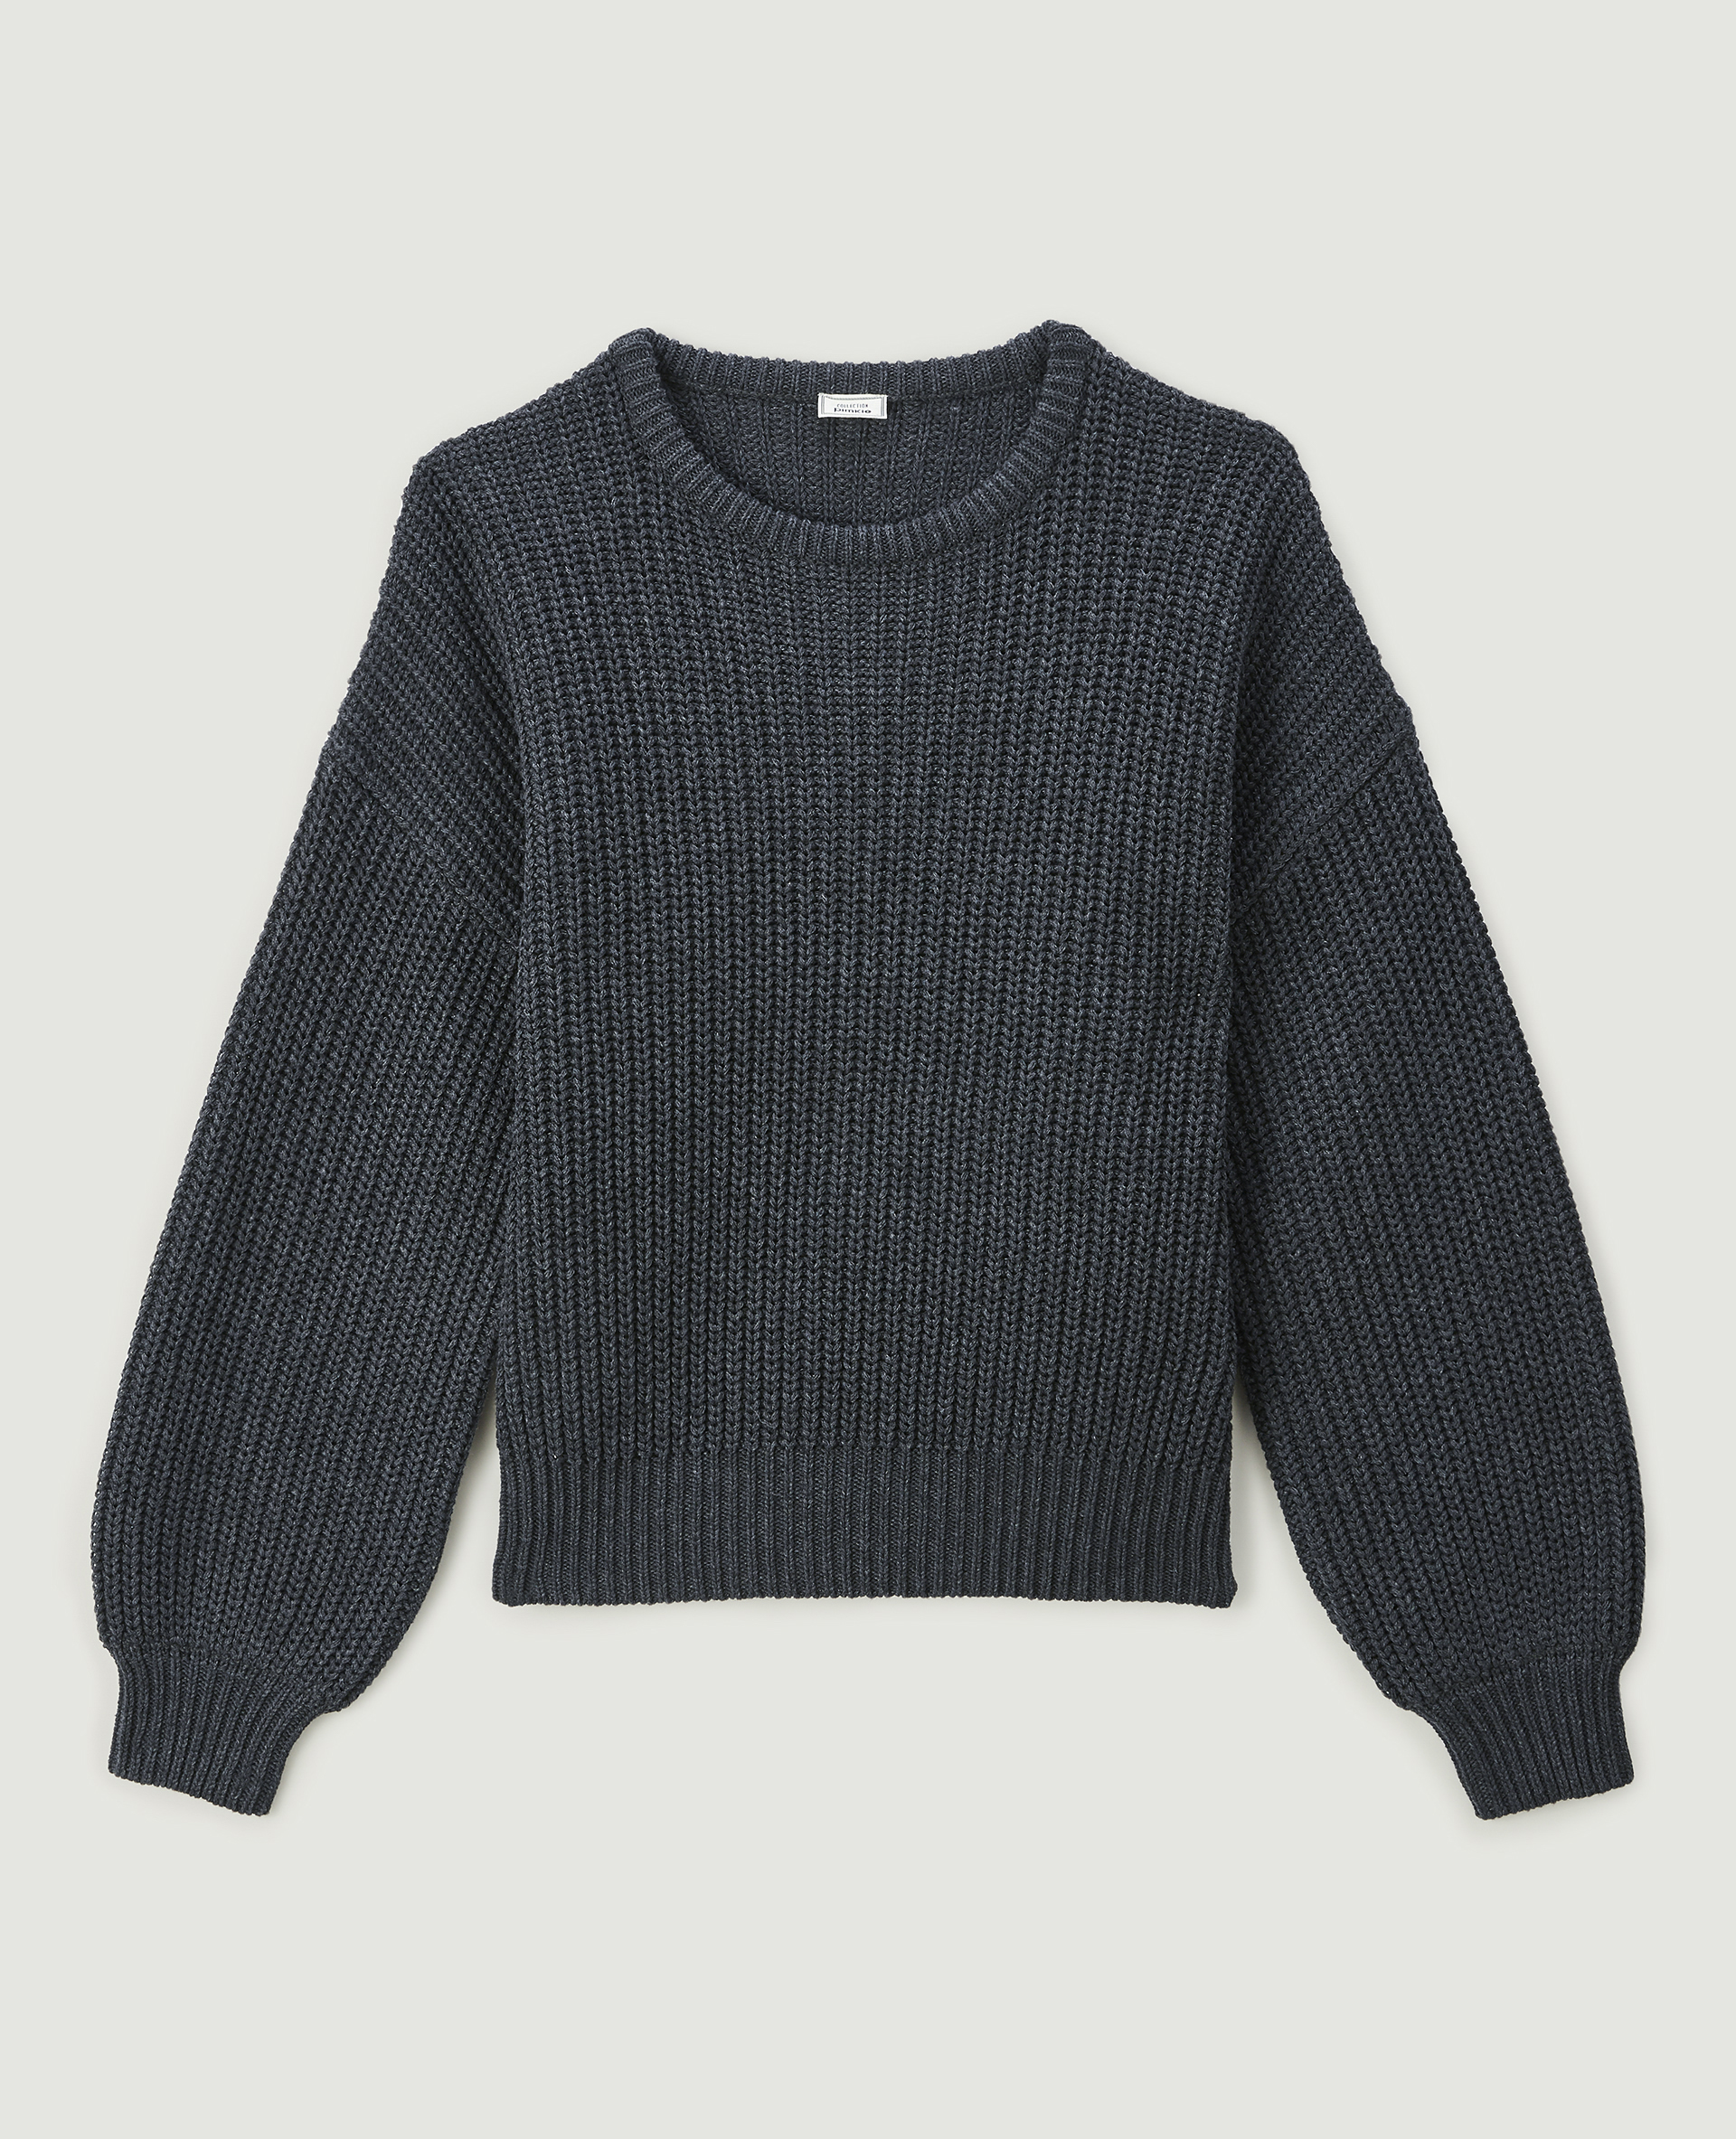 Pull grosse maille gris clair chiné - Pimkie